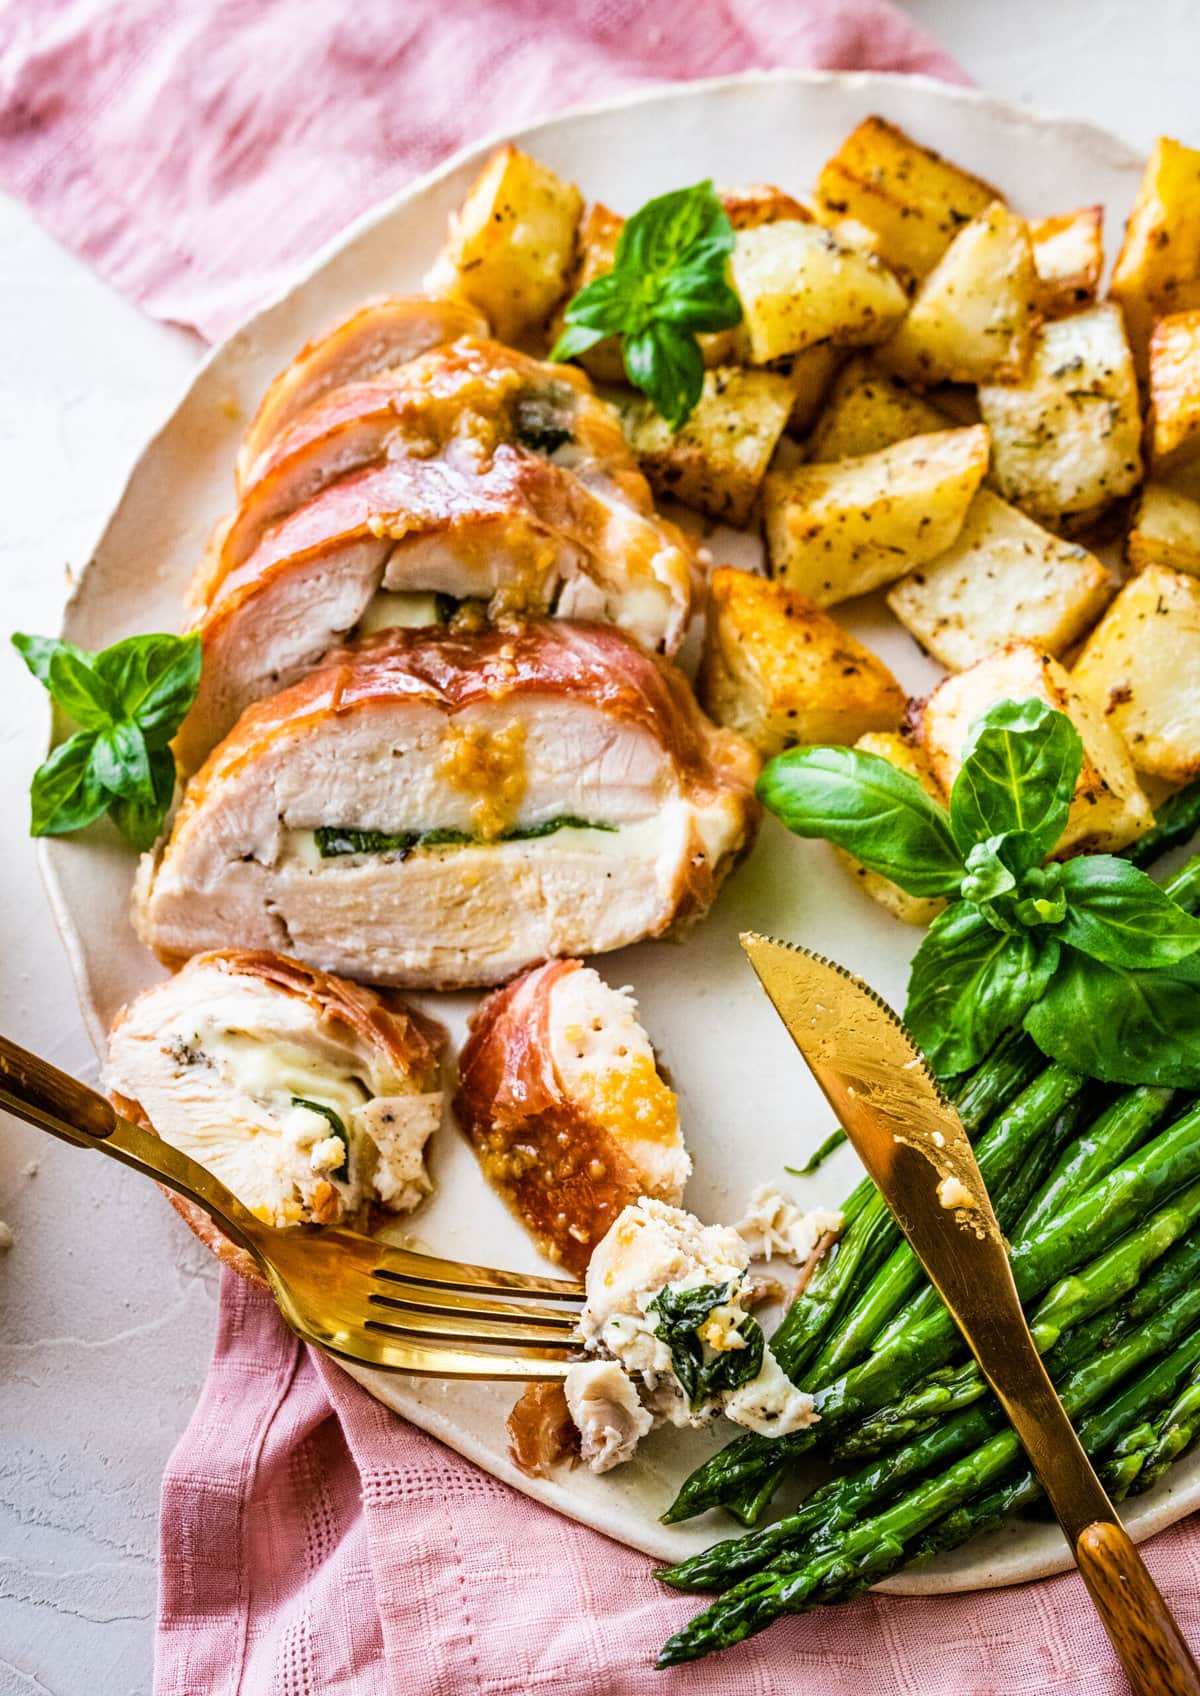 How to make Mozzarella stuffed Chicken chicken- finished stuffed chicken cut in slices and served on a white platter with fresh basil and drizzled with pan sauce. Bread slices in background. Served with roasted potatoes and asparagus.